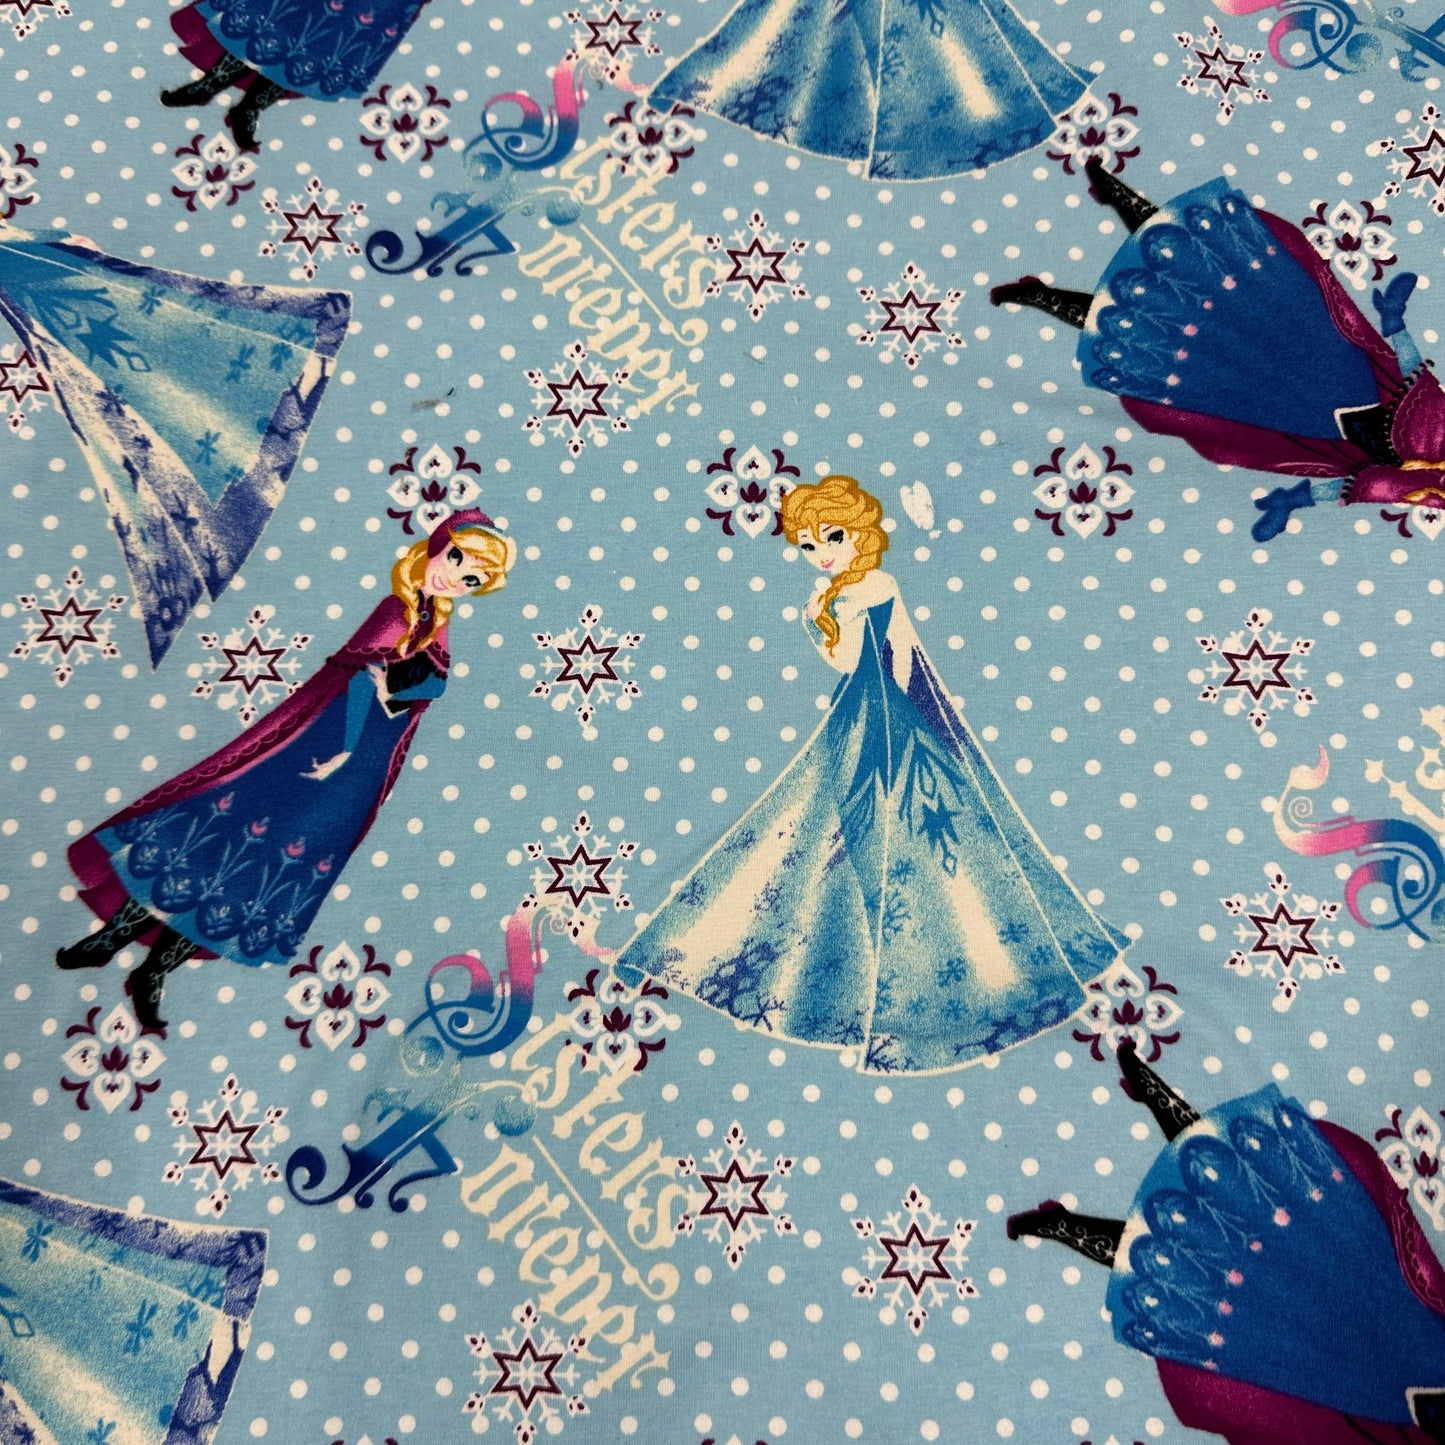 Sisters Forever on Cotton/Spandex Jersey Fabric - Nature's Fabrics